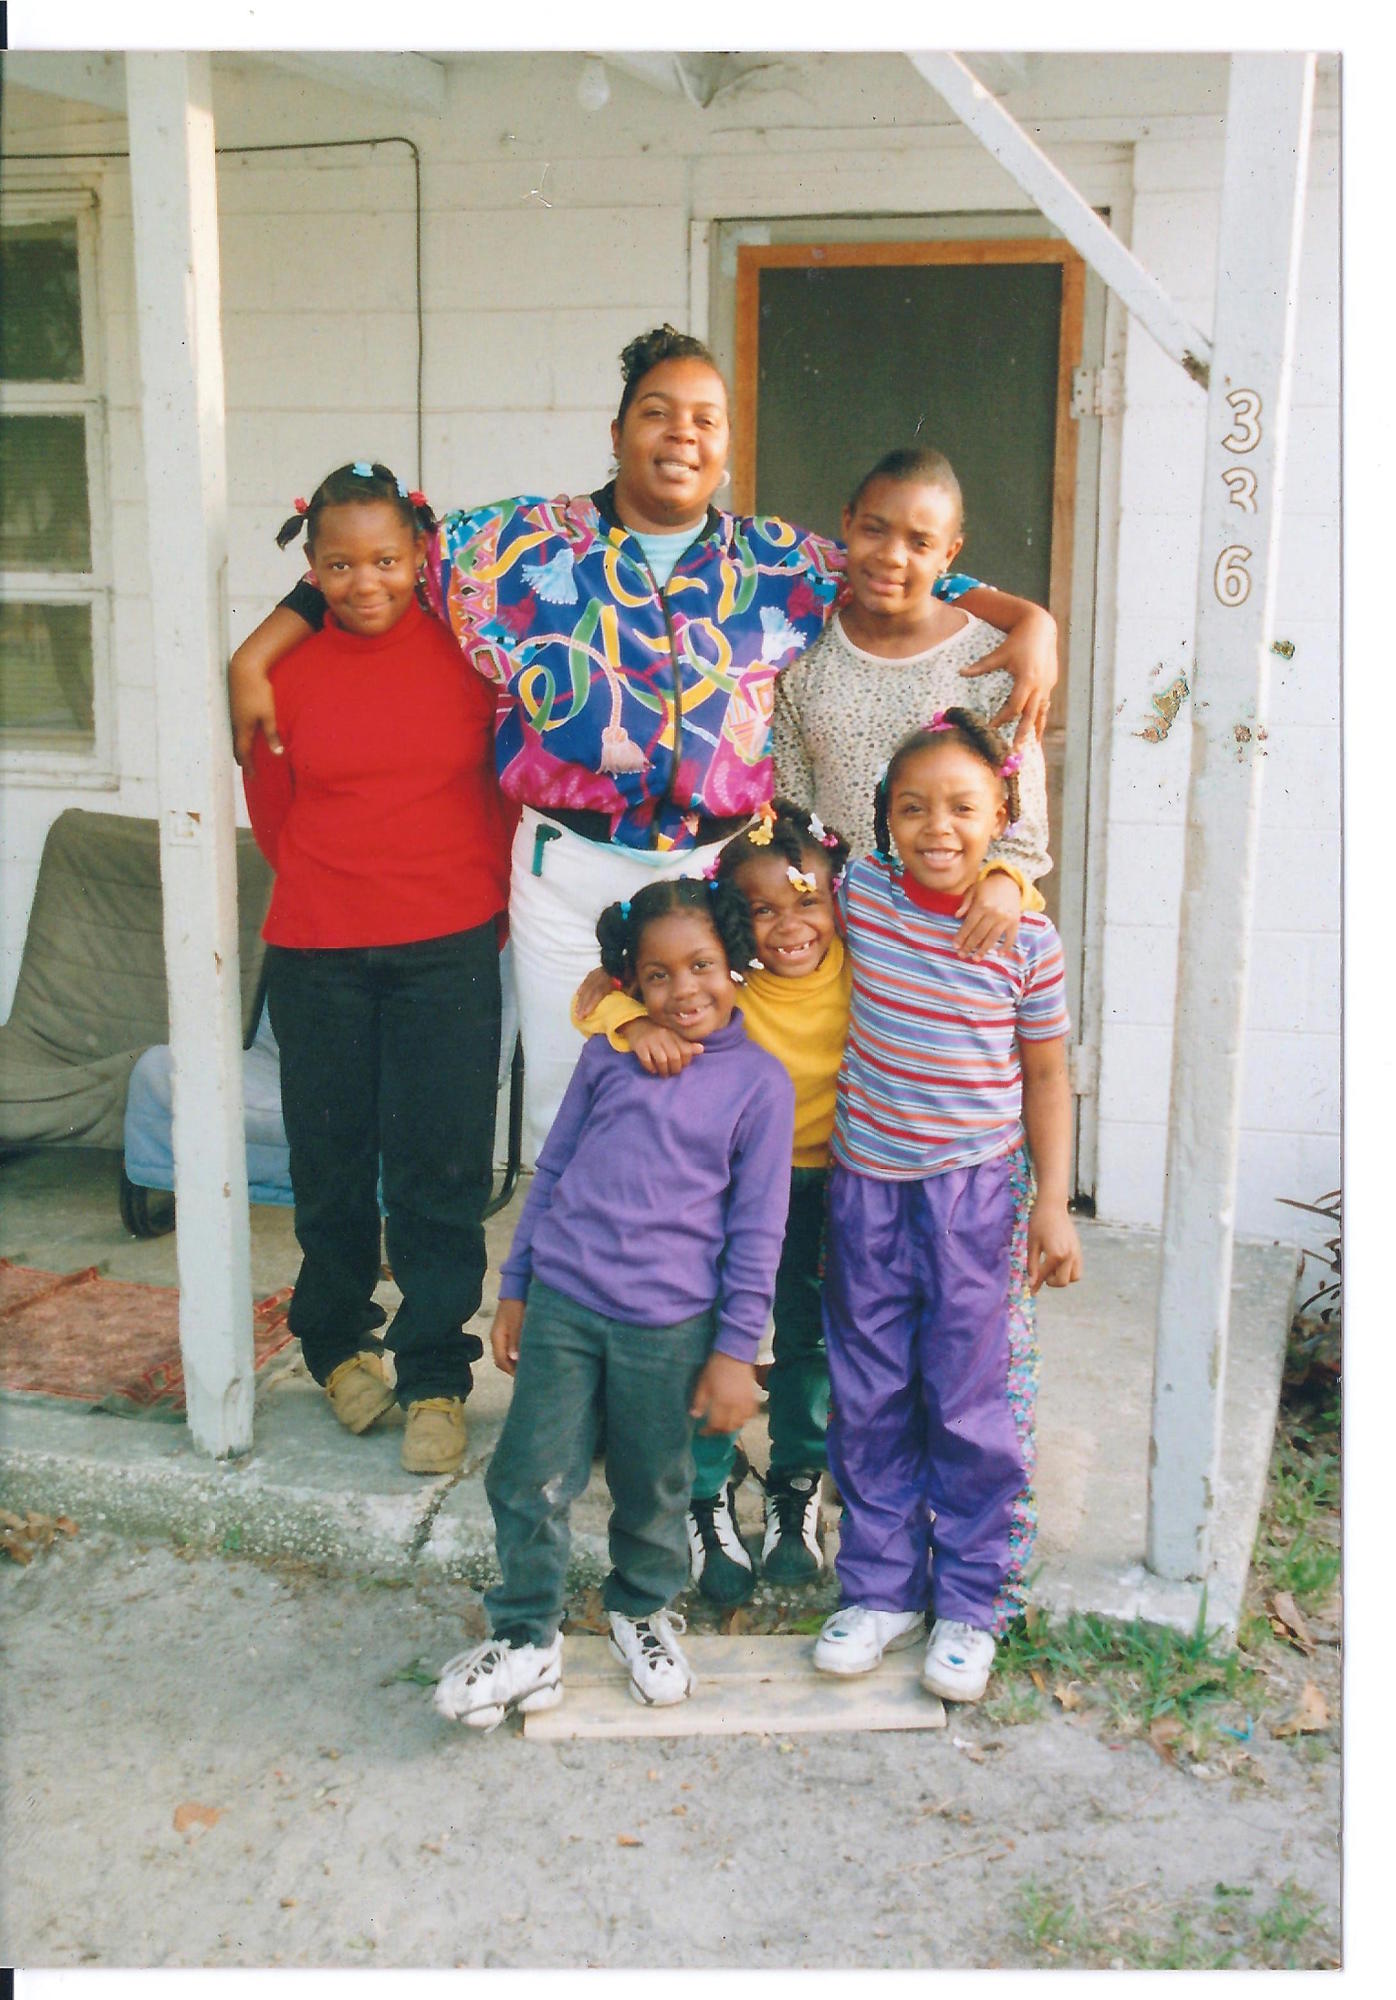 Jackie Reynolds and her five daughters were anticipating a new Habitat home in 1997.